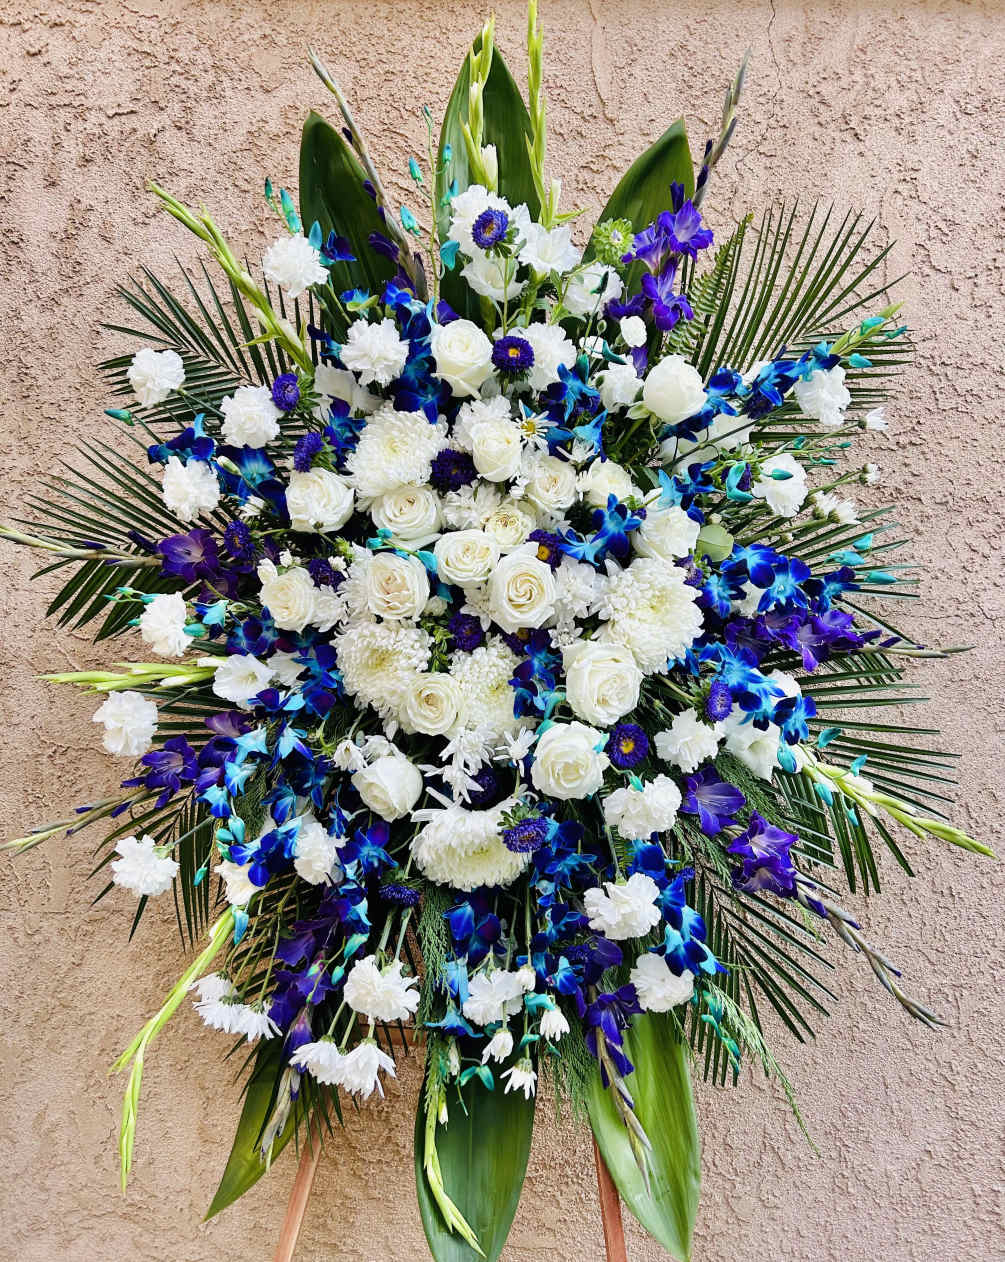 Beautiful blue and white floral spray featuring gladiolus, roses, chrysanthemum, daises, and